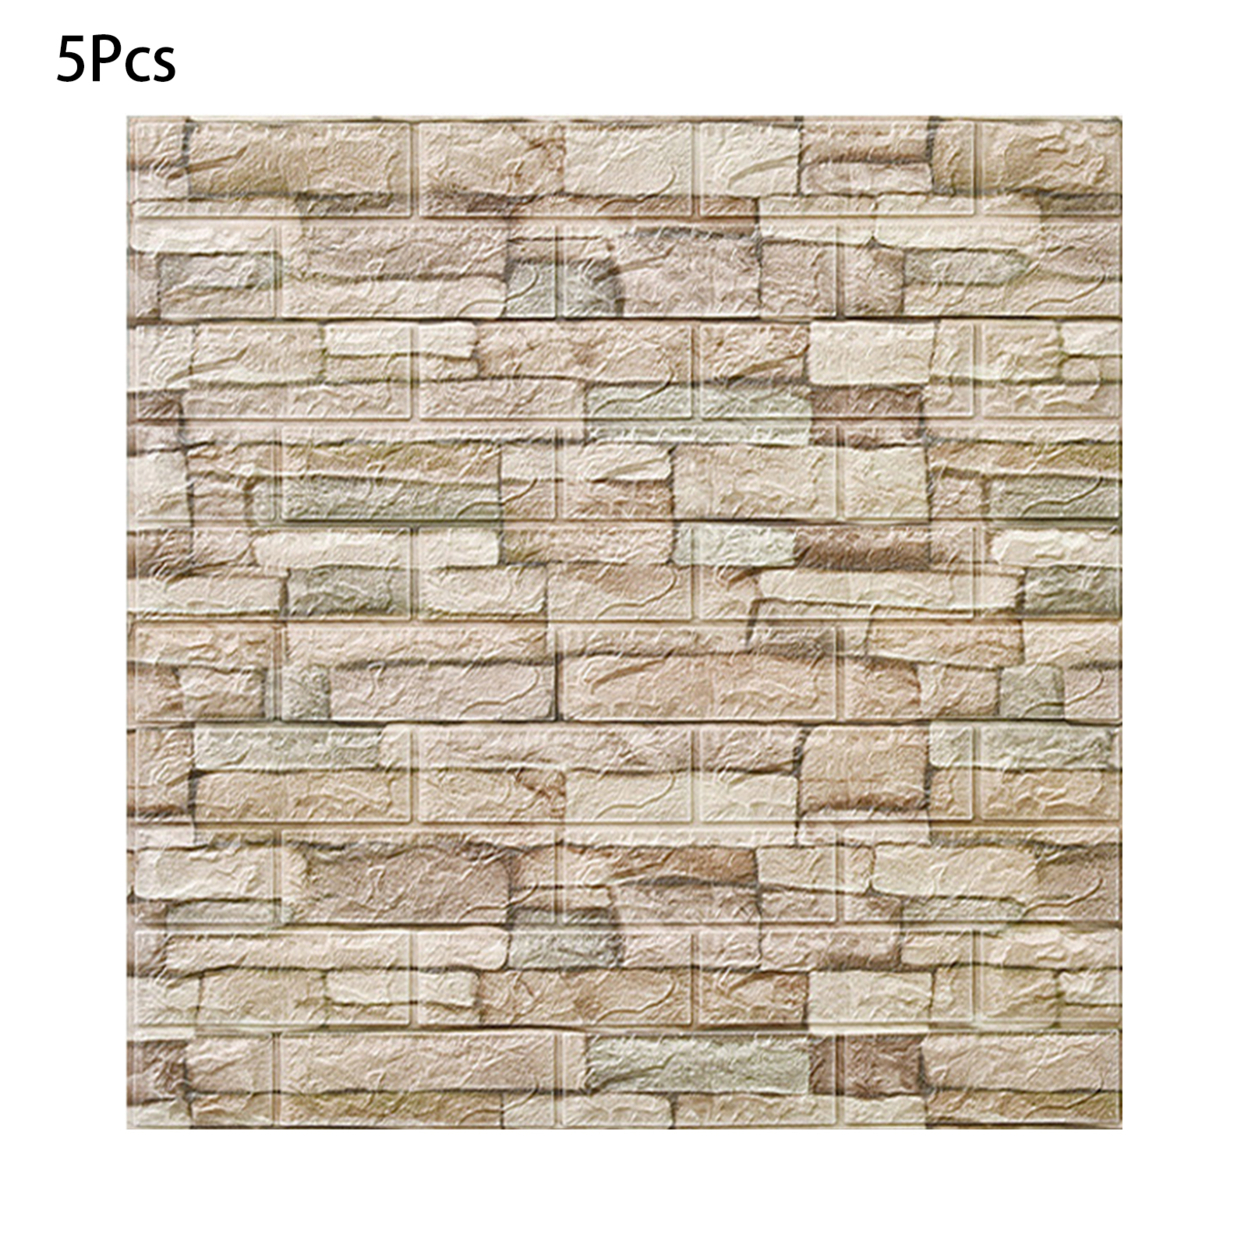 5Pcs Wall Stickers Lightweight Nice-looking Convenient 3D Wall Decals Brick Pattern Wallpapers for Home - cream - beige